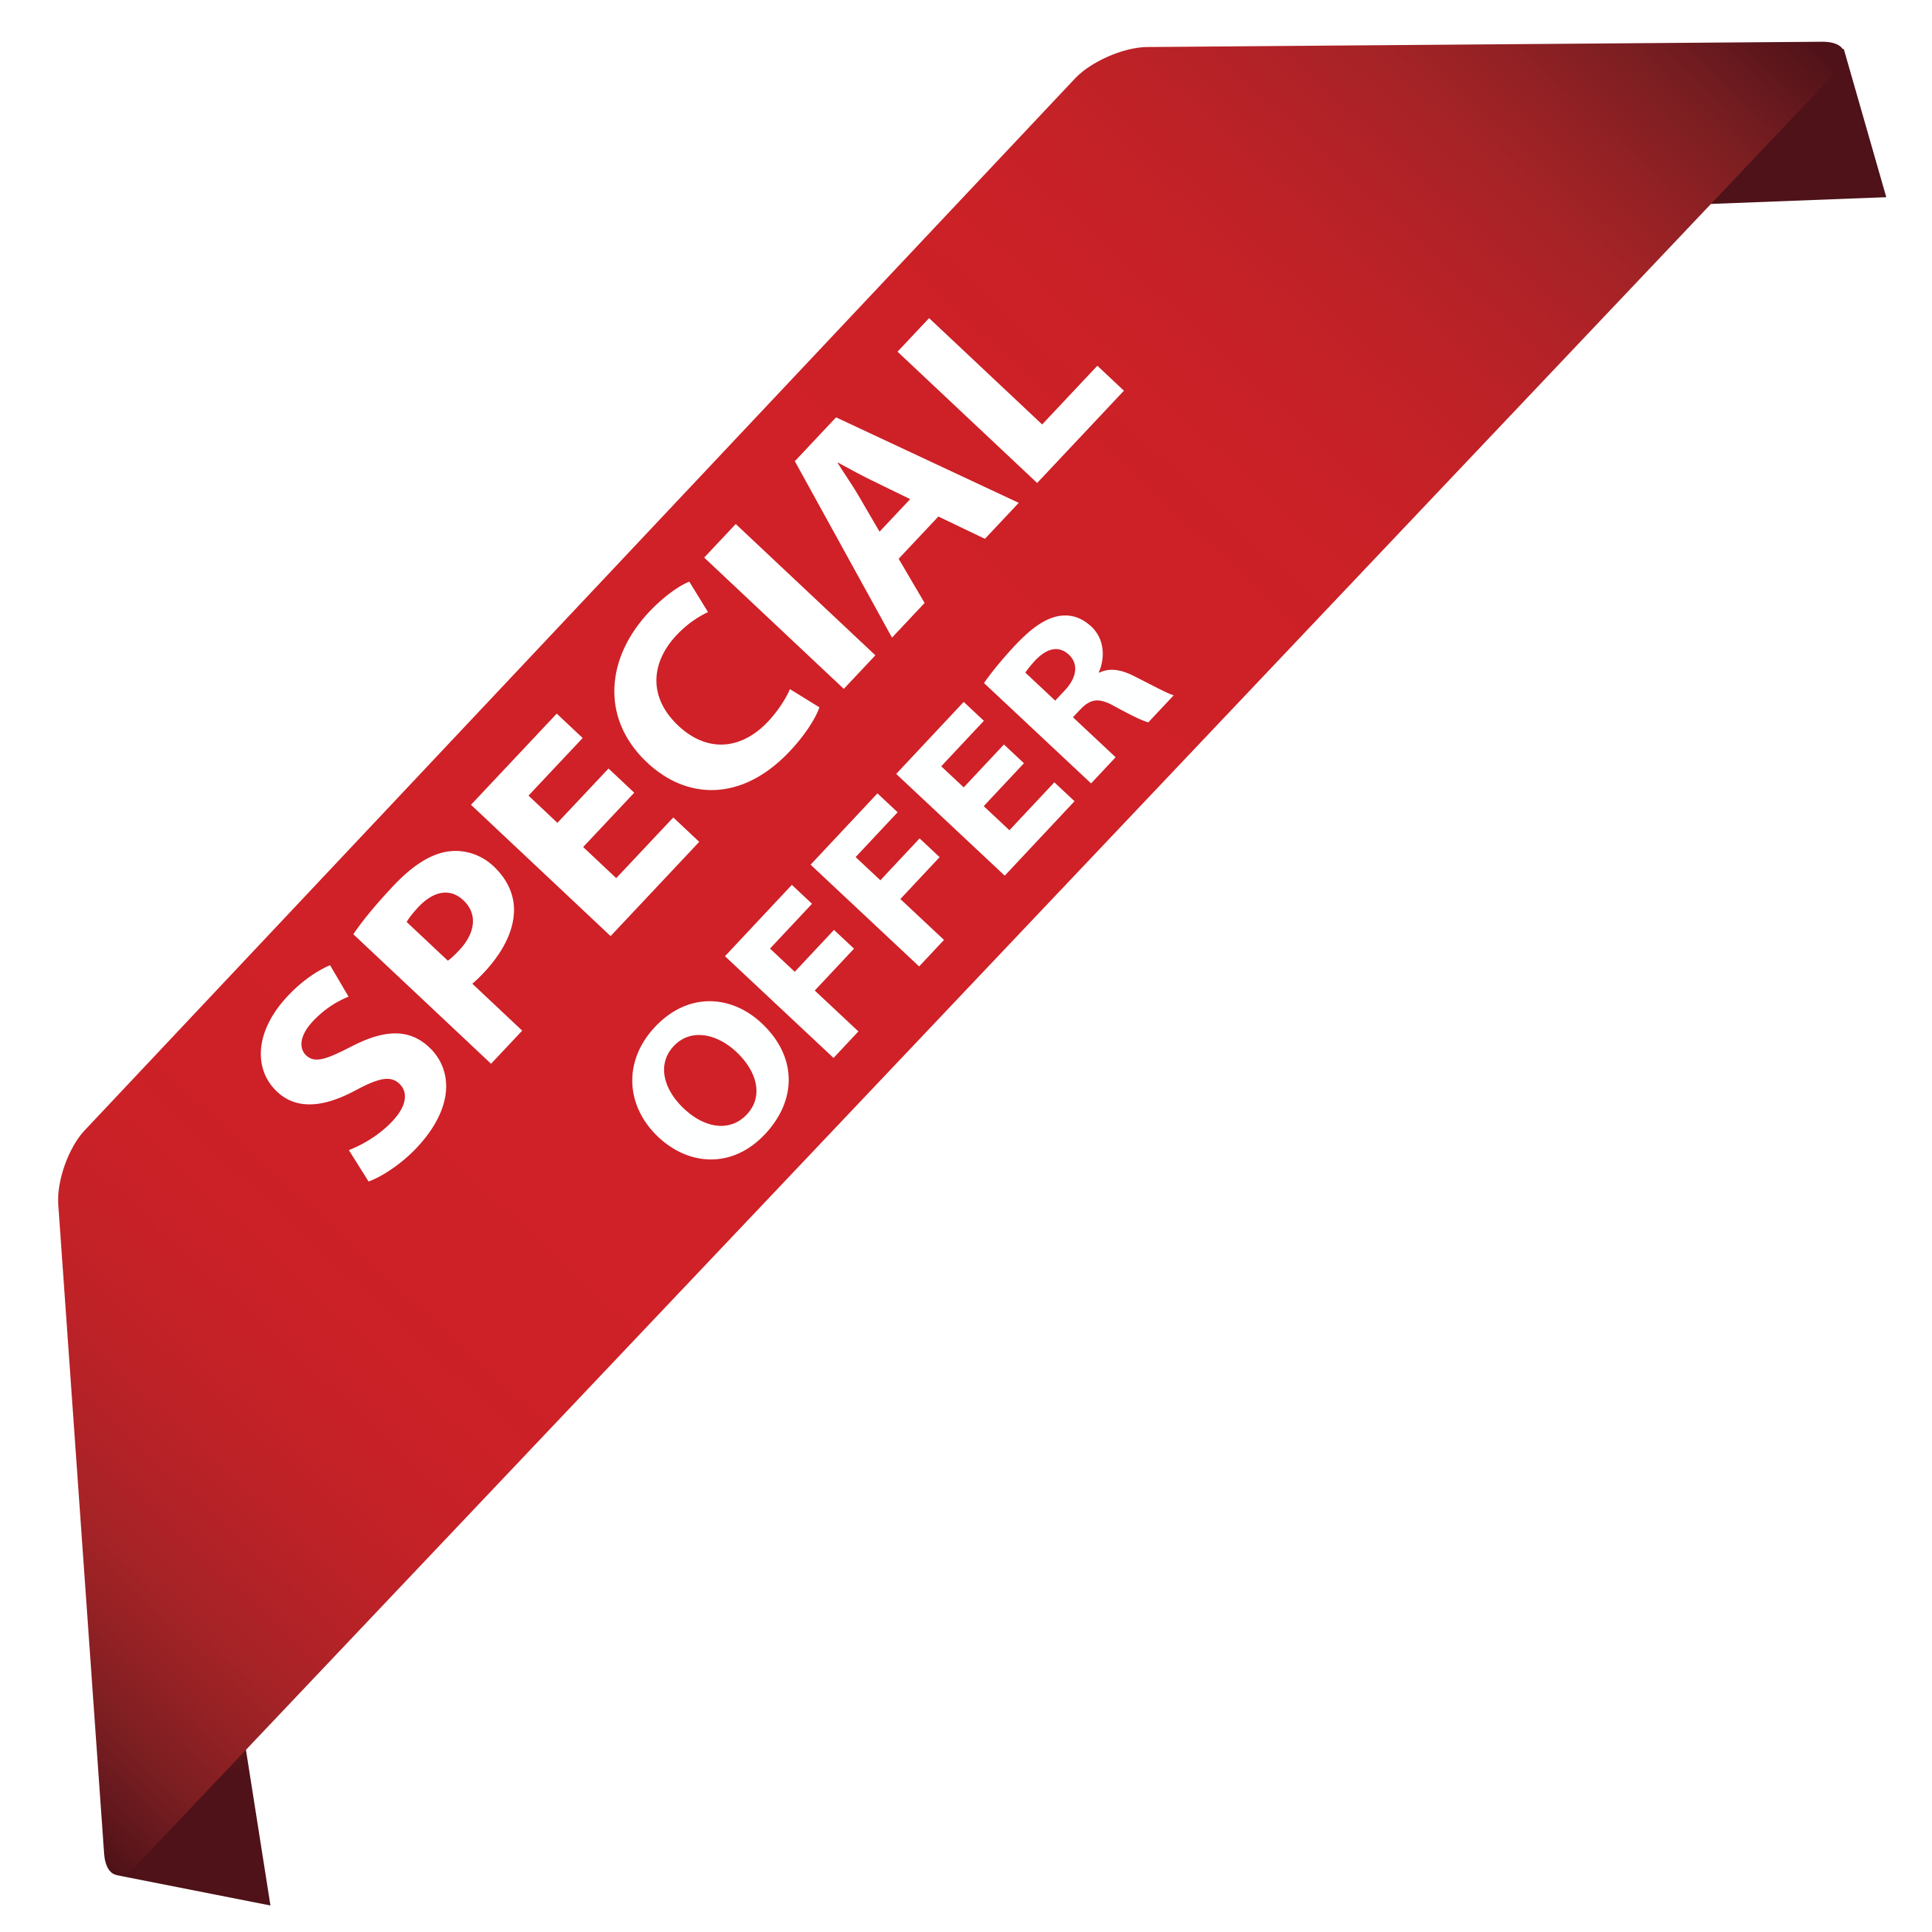 Special Offer Png Offer Png Special Stock Illustrations 305 Offer Png